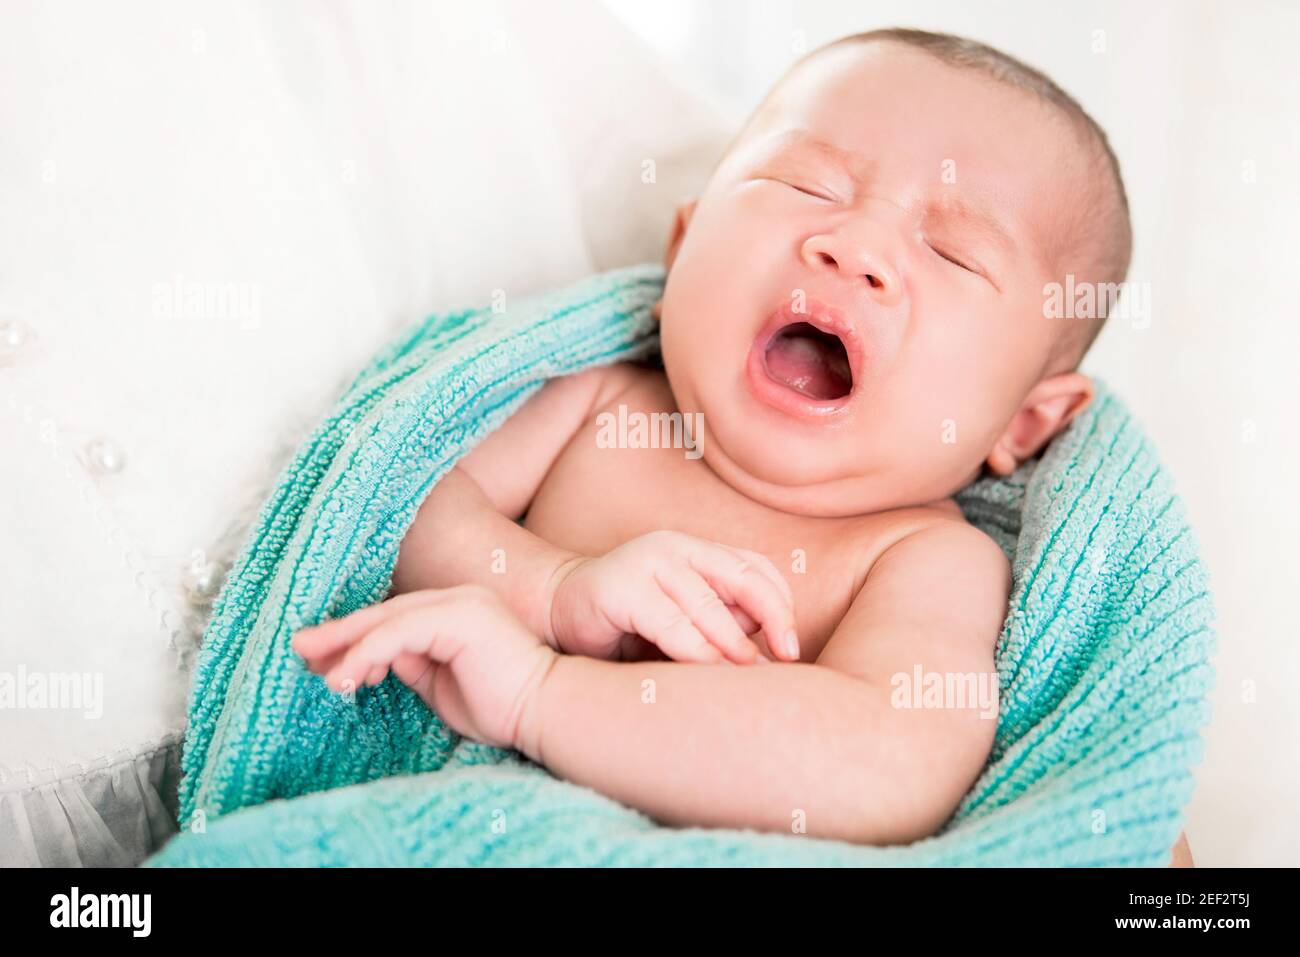 Adorable newborn baby crying in the arms of mother while going to sleep Stock Photo